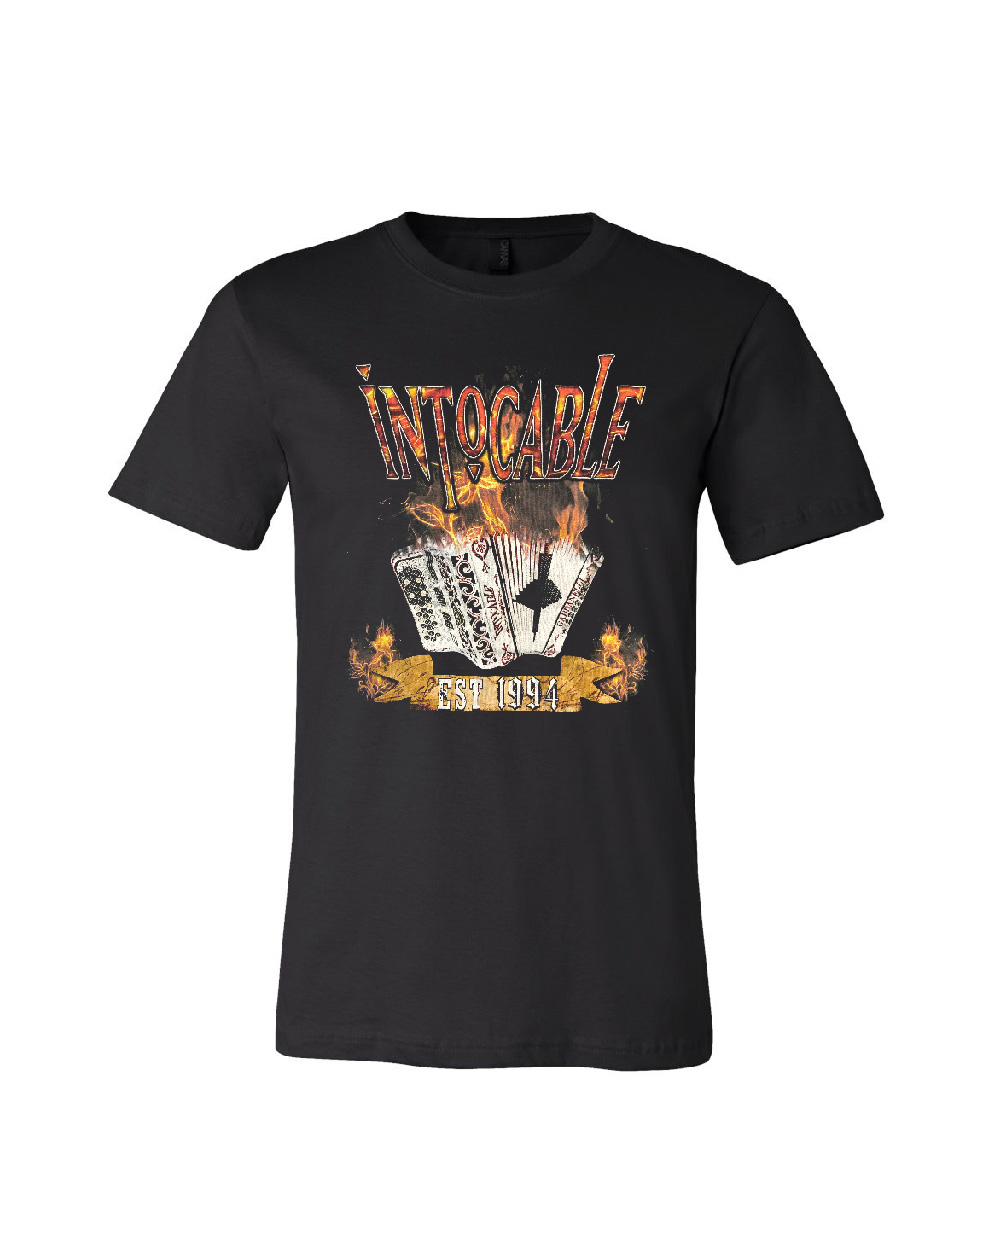 ACCORDION ON FIRE TEE (Short Sleeve) - Grupo Intocable